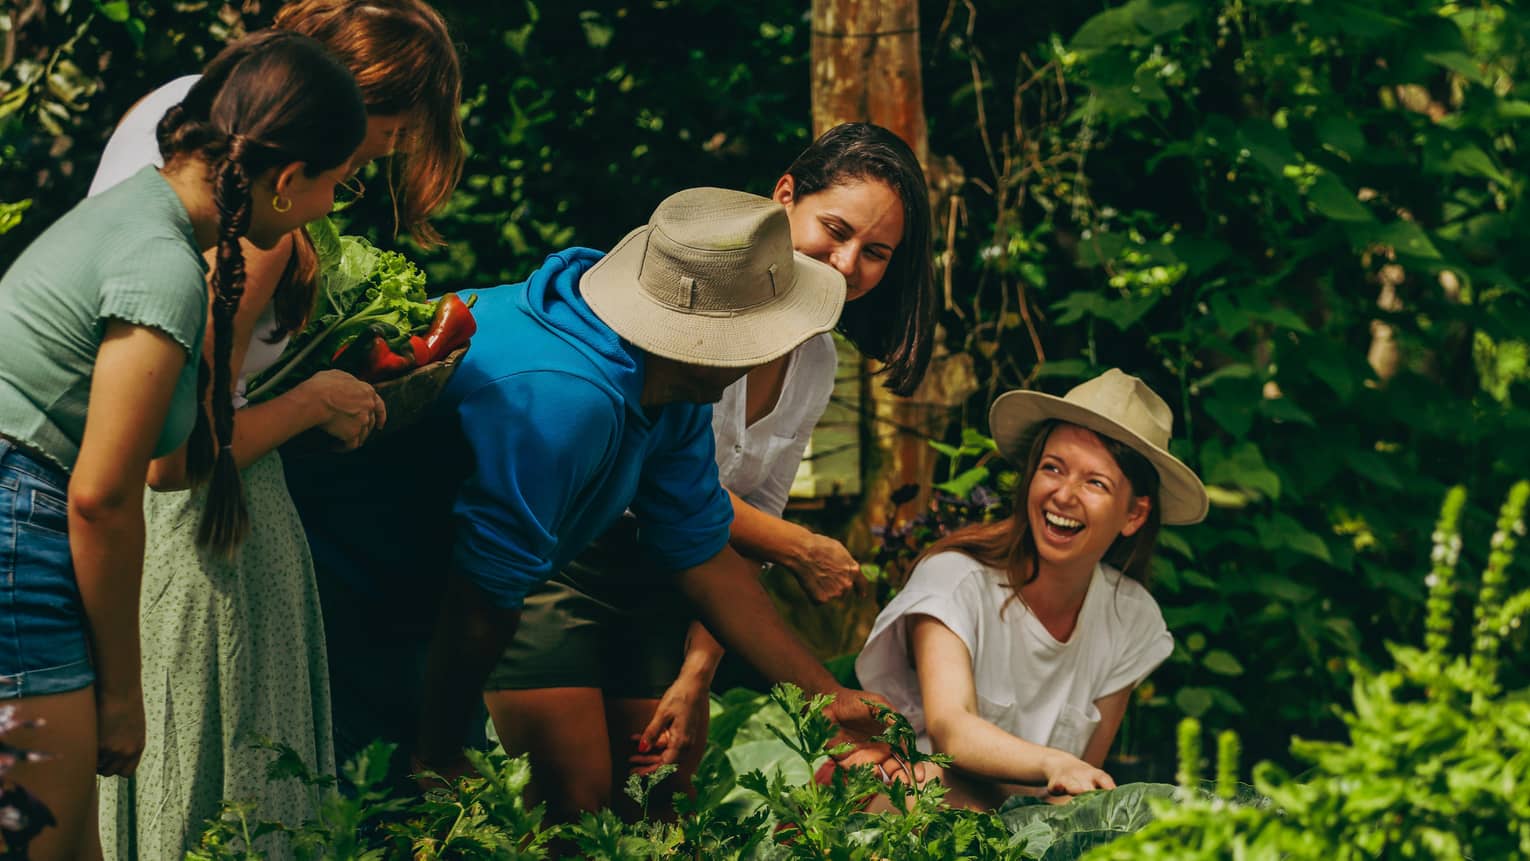 A group of people in an herb garden laughing while holding vegetables.